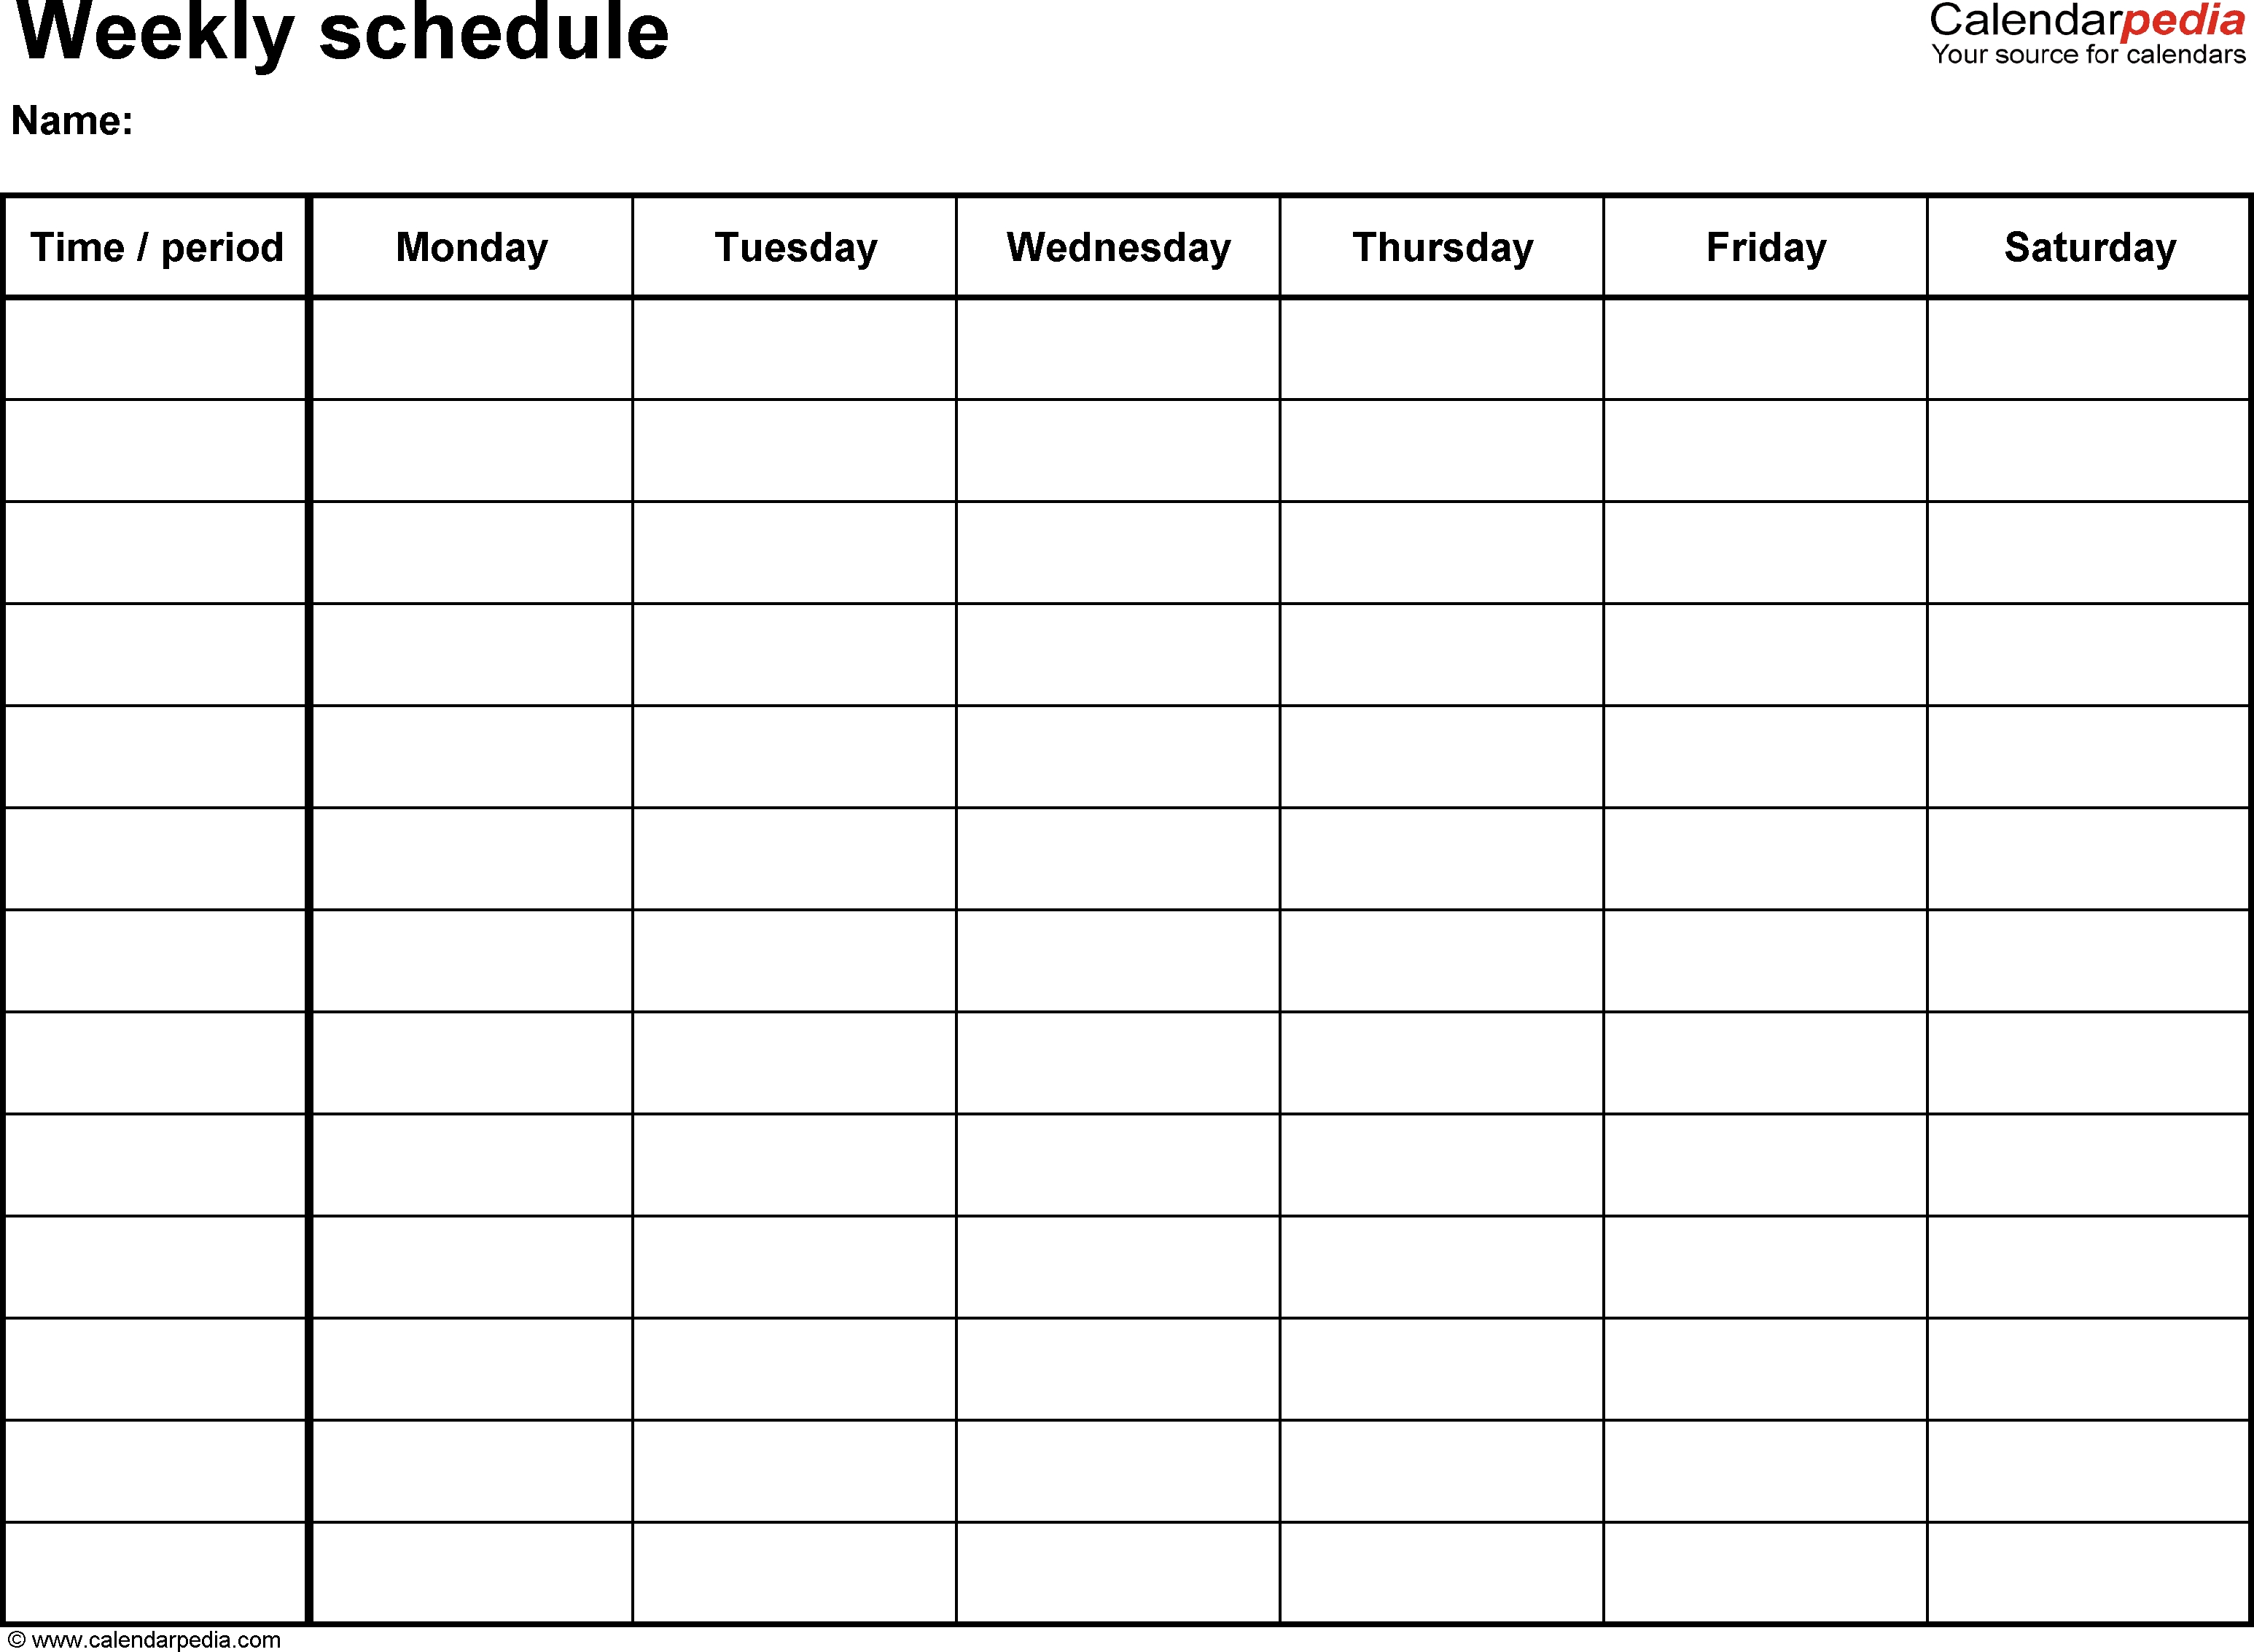 Free Weekly Schedule Templates For Word - 18 Templates intended for Weekly Blank Calendar Monday Through Friday